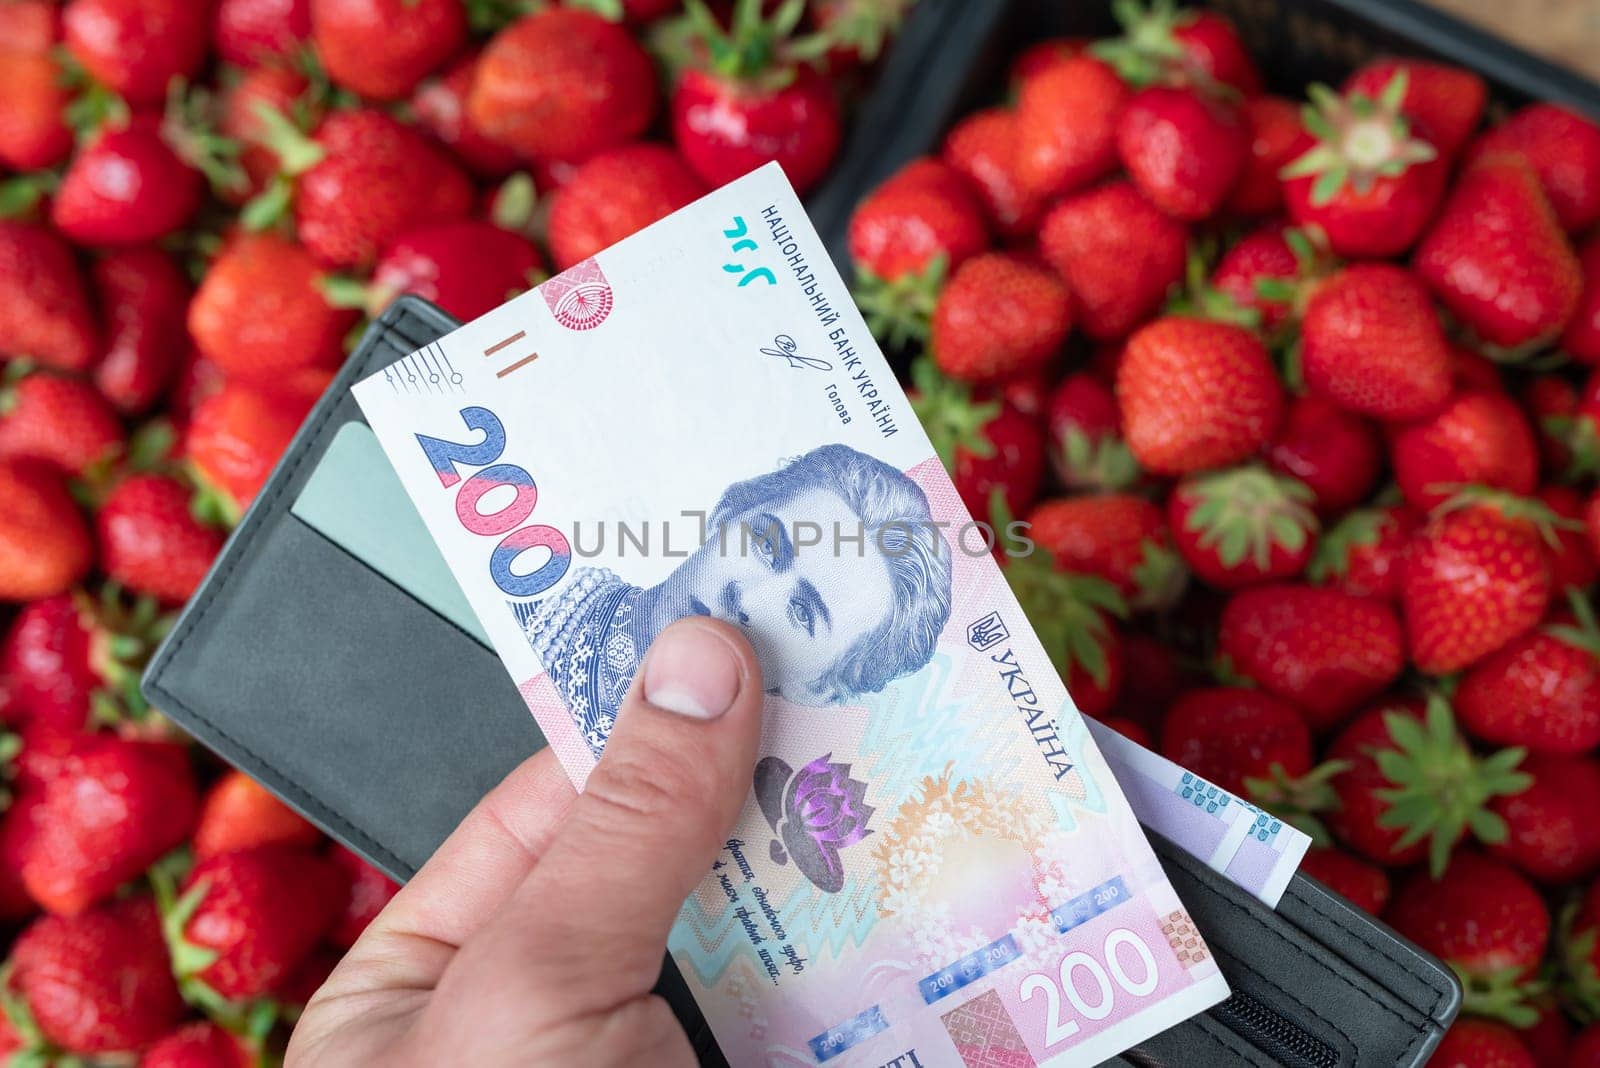 Ukrainian 200 hryvnia banknote in front of strawberries, ready to buy some berries